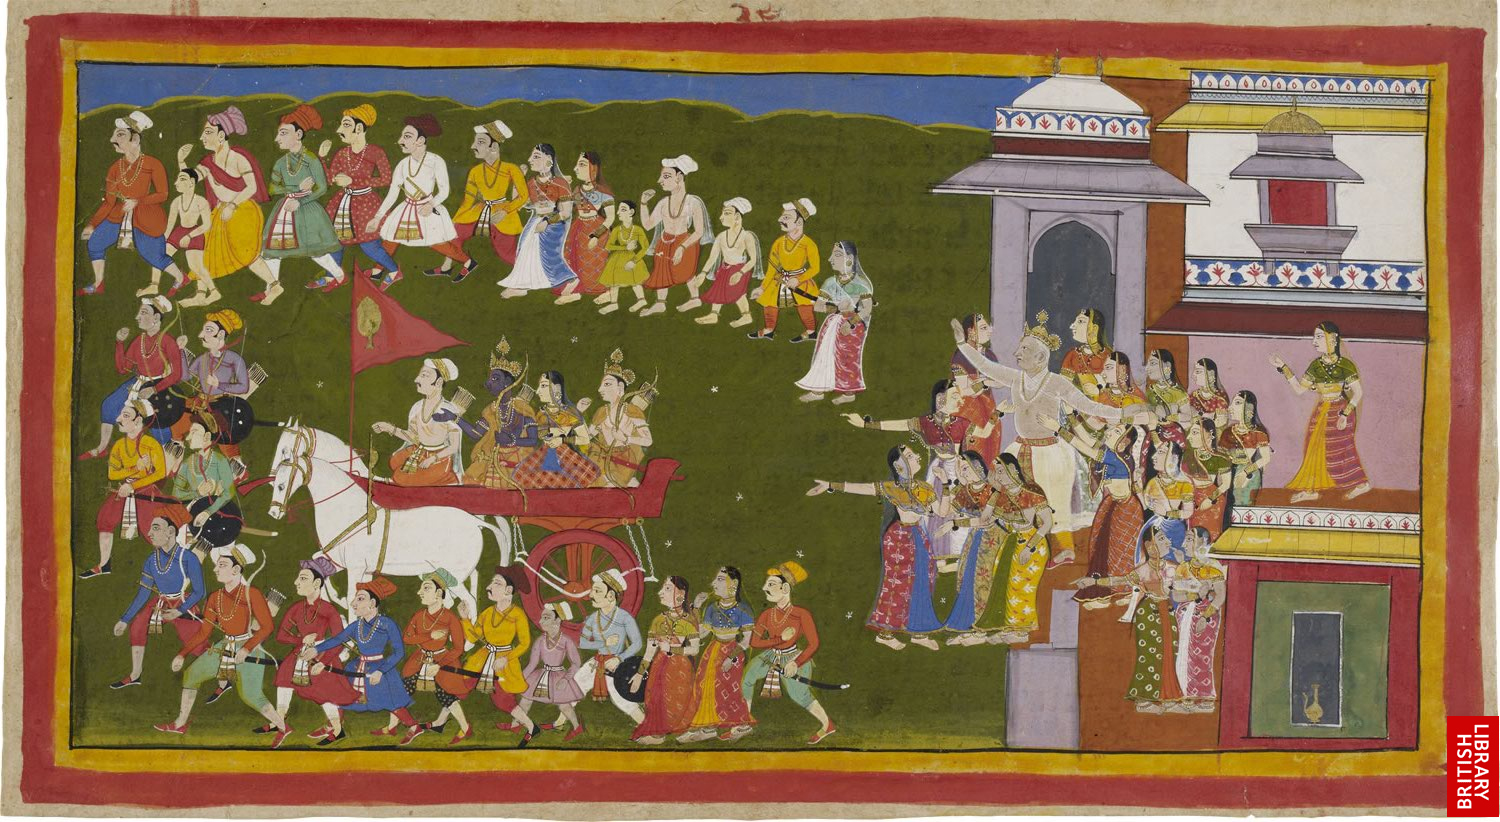 Rama, in wagon, leaving for fourteen years of exile from Ayodhya. Image courtesy of The British Library/Creative Commons